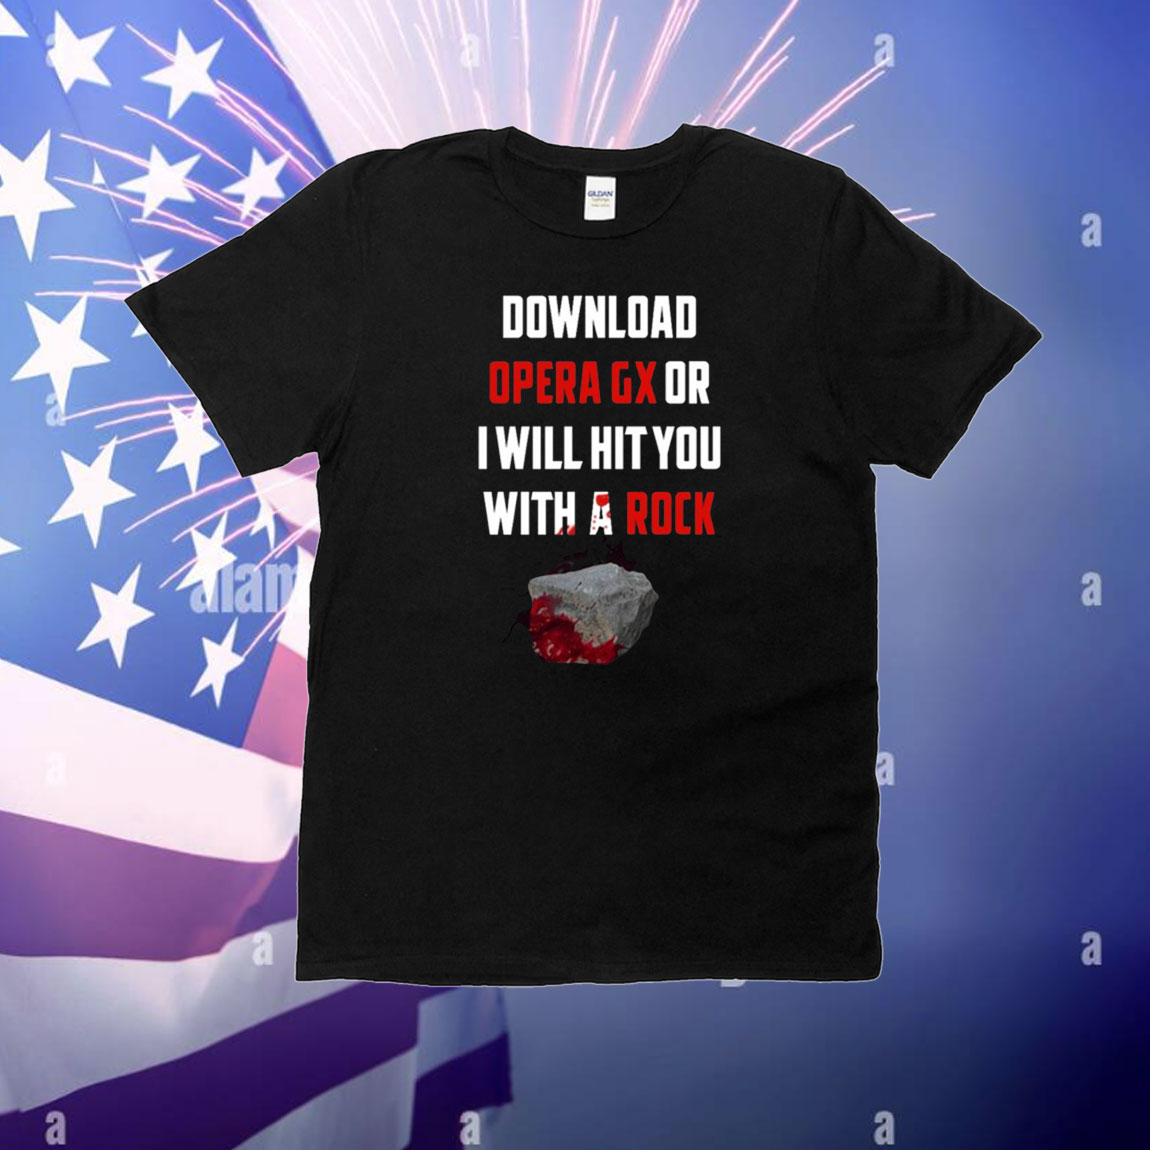 Download Opera Gx Or I Will Hit You With A Rock T-Shirt